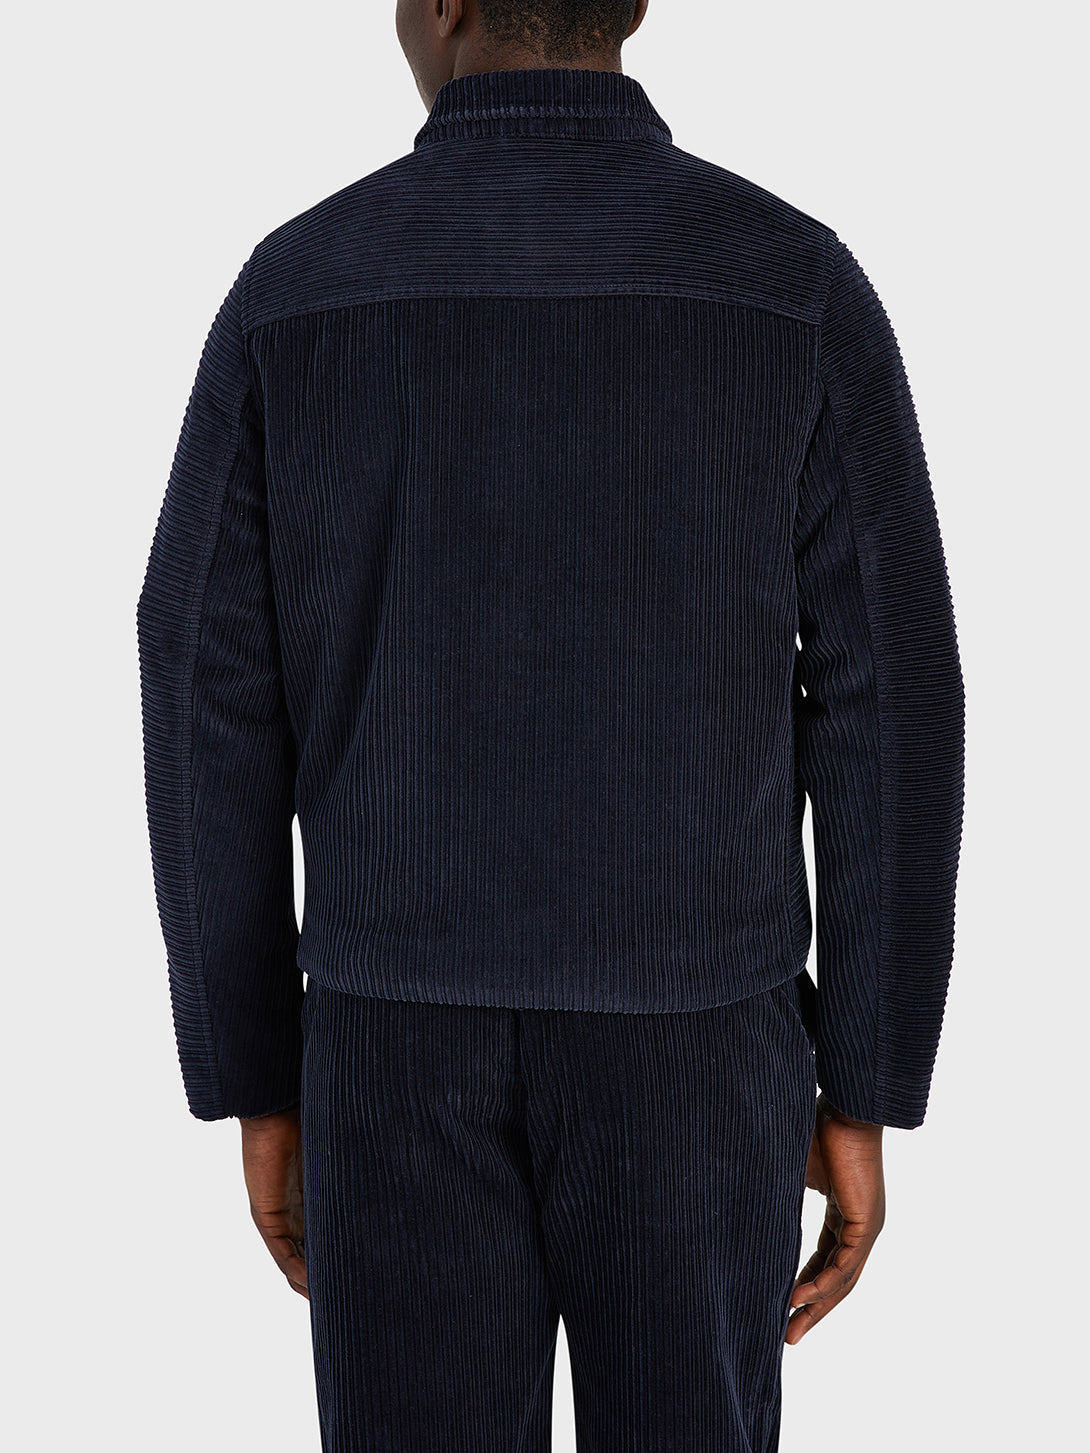 black friday deals ONS Clothing Men's CONNOR CORD JACKET in NAVY